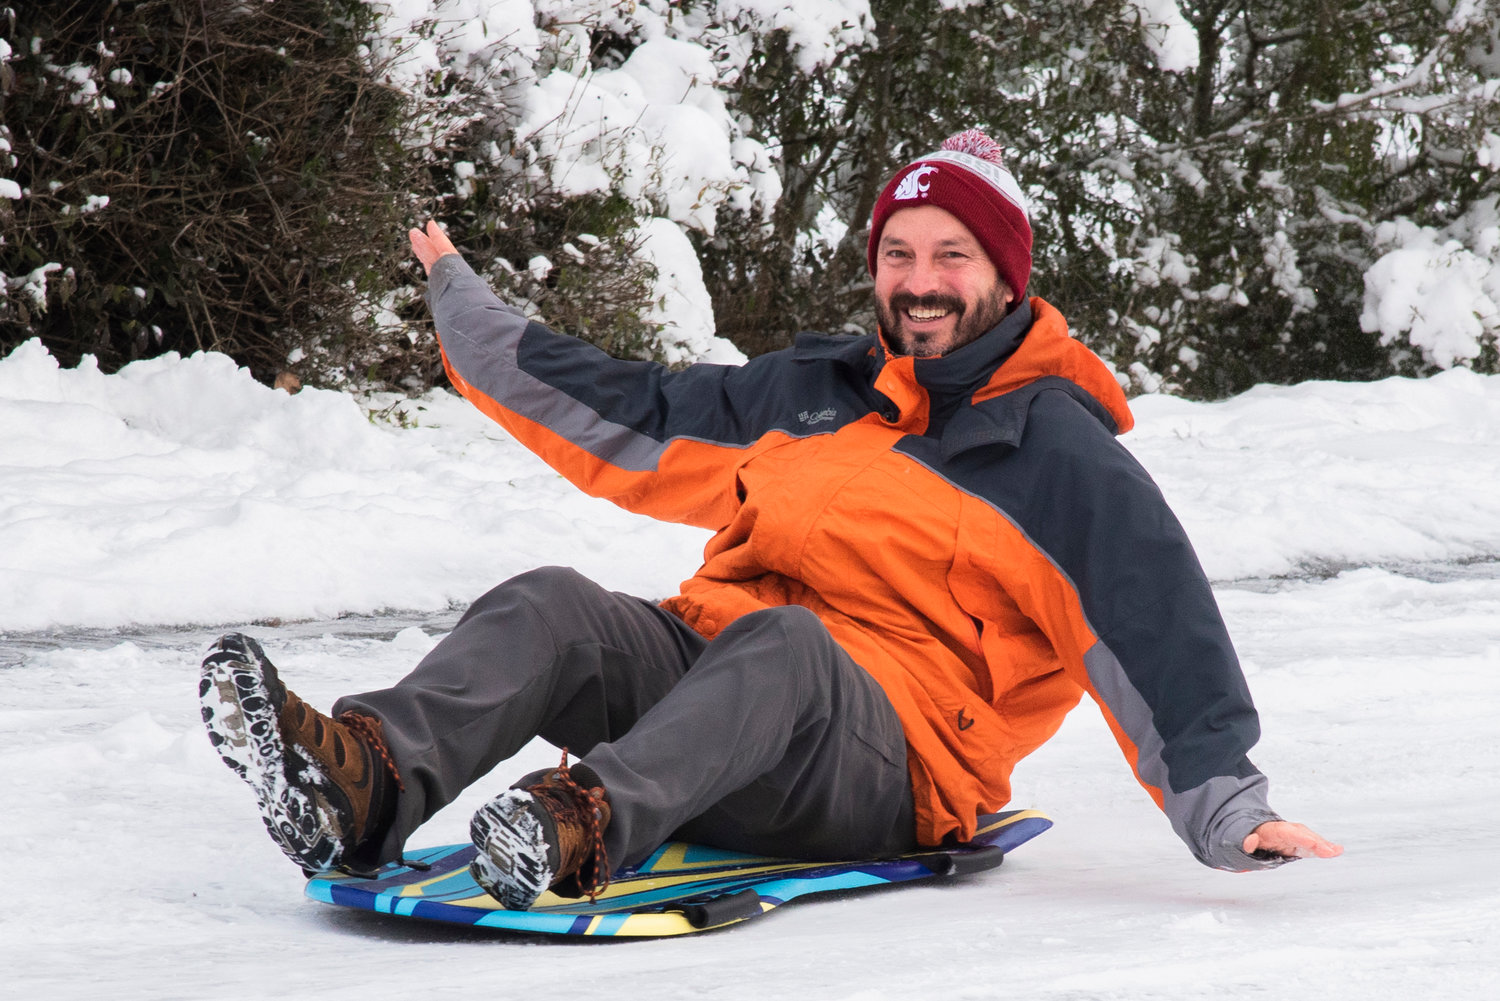 Centralia High School Assistant Principal Mike Stratton smiles as he sleds down East Locust Street Monday morning.